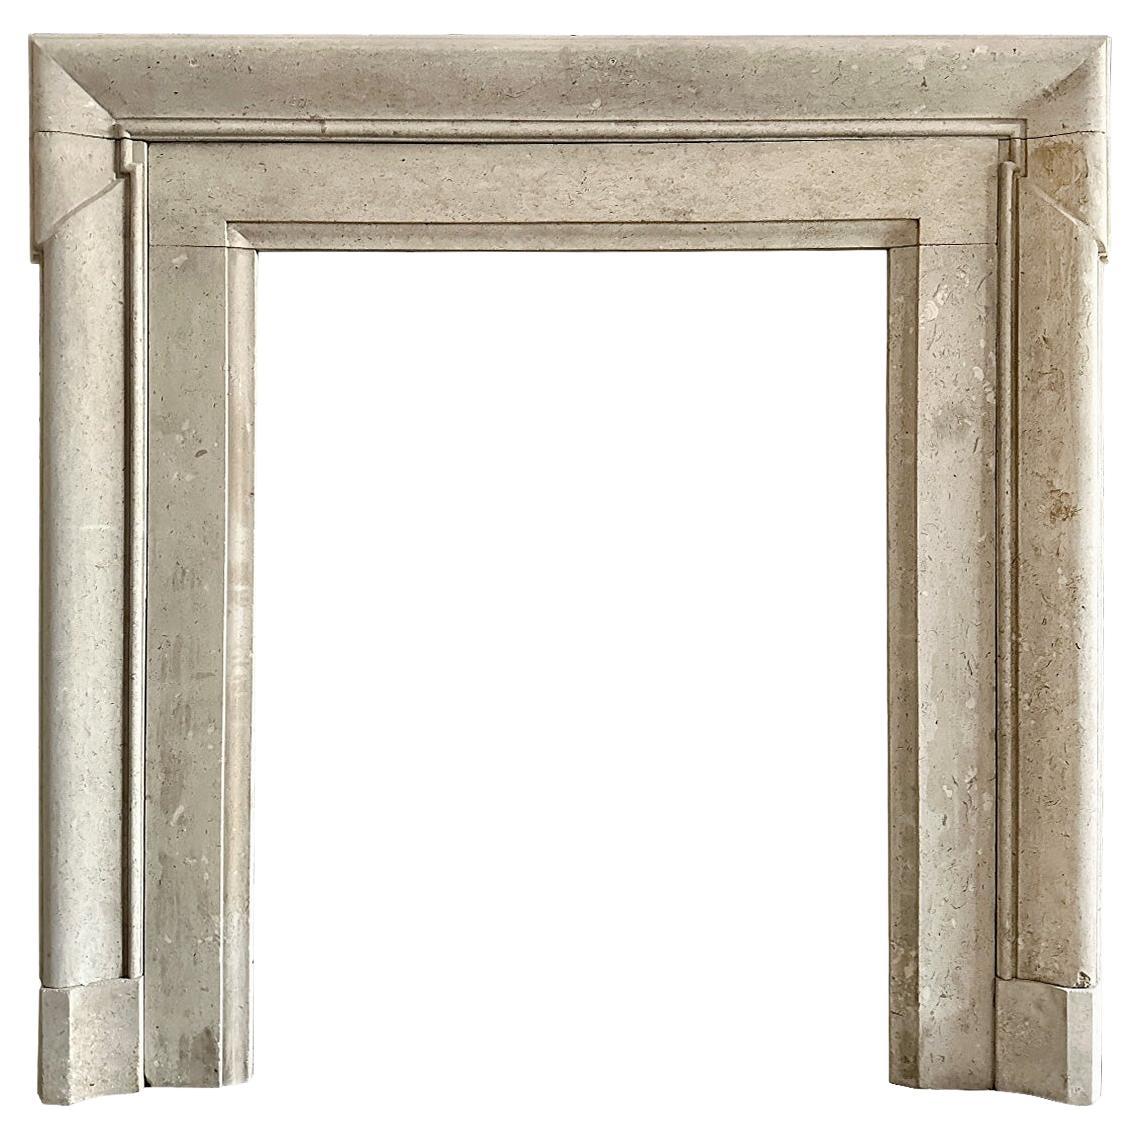 An 18th Century Architectural English Stone Bolection Fireplace Mantel  For Sale